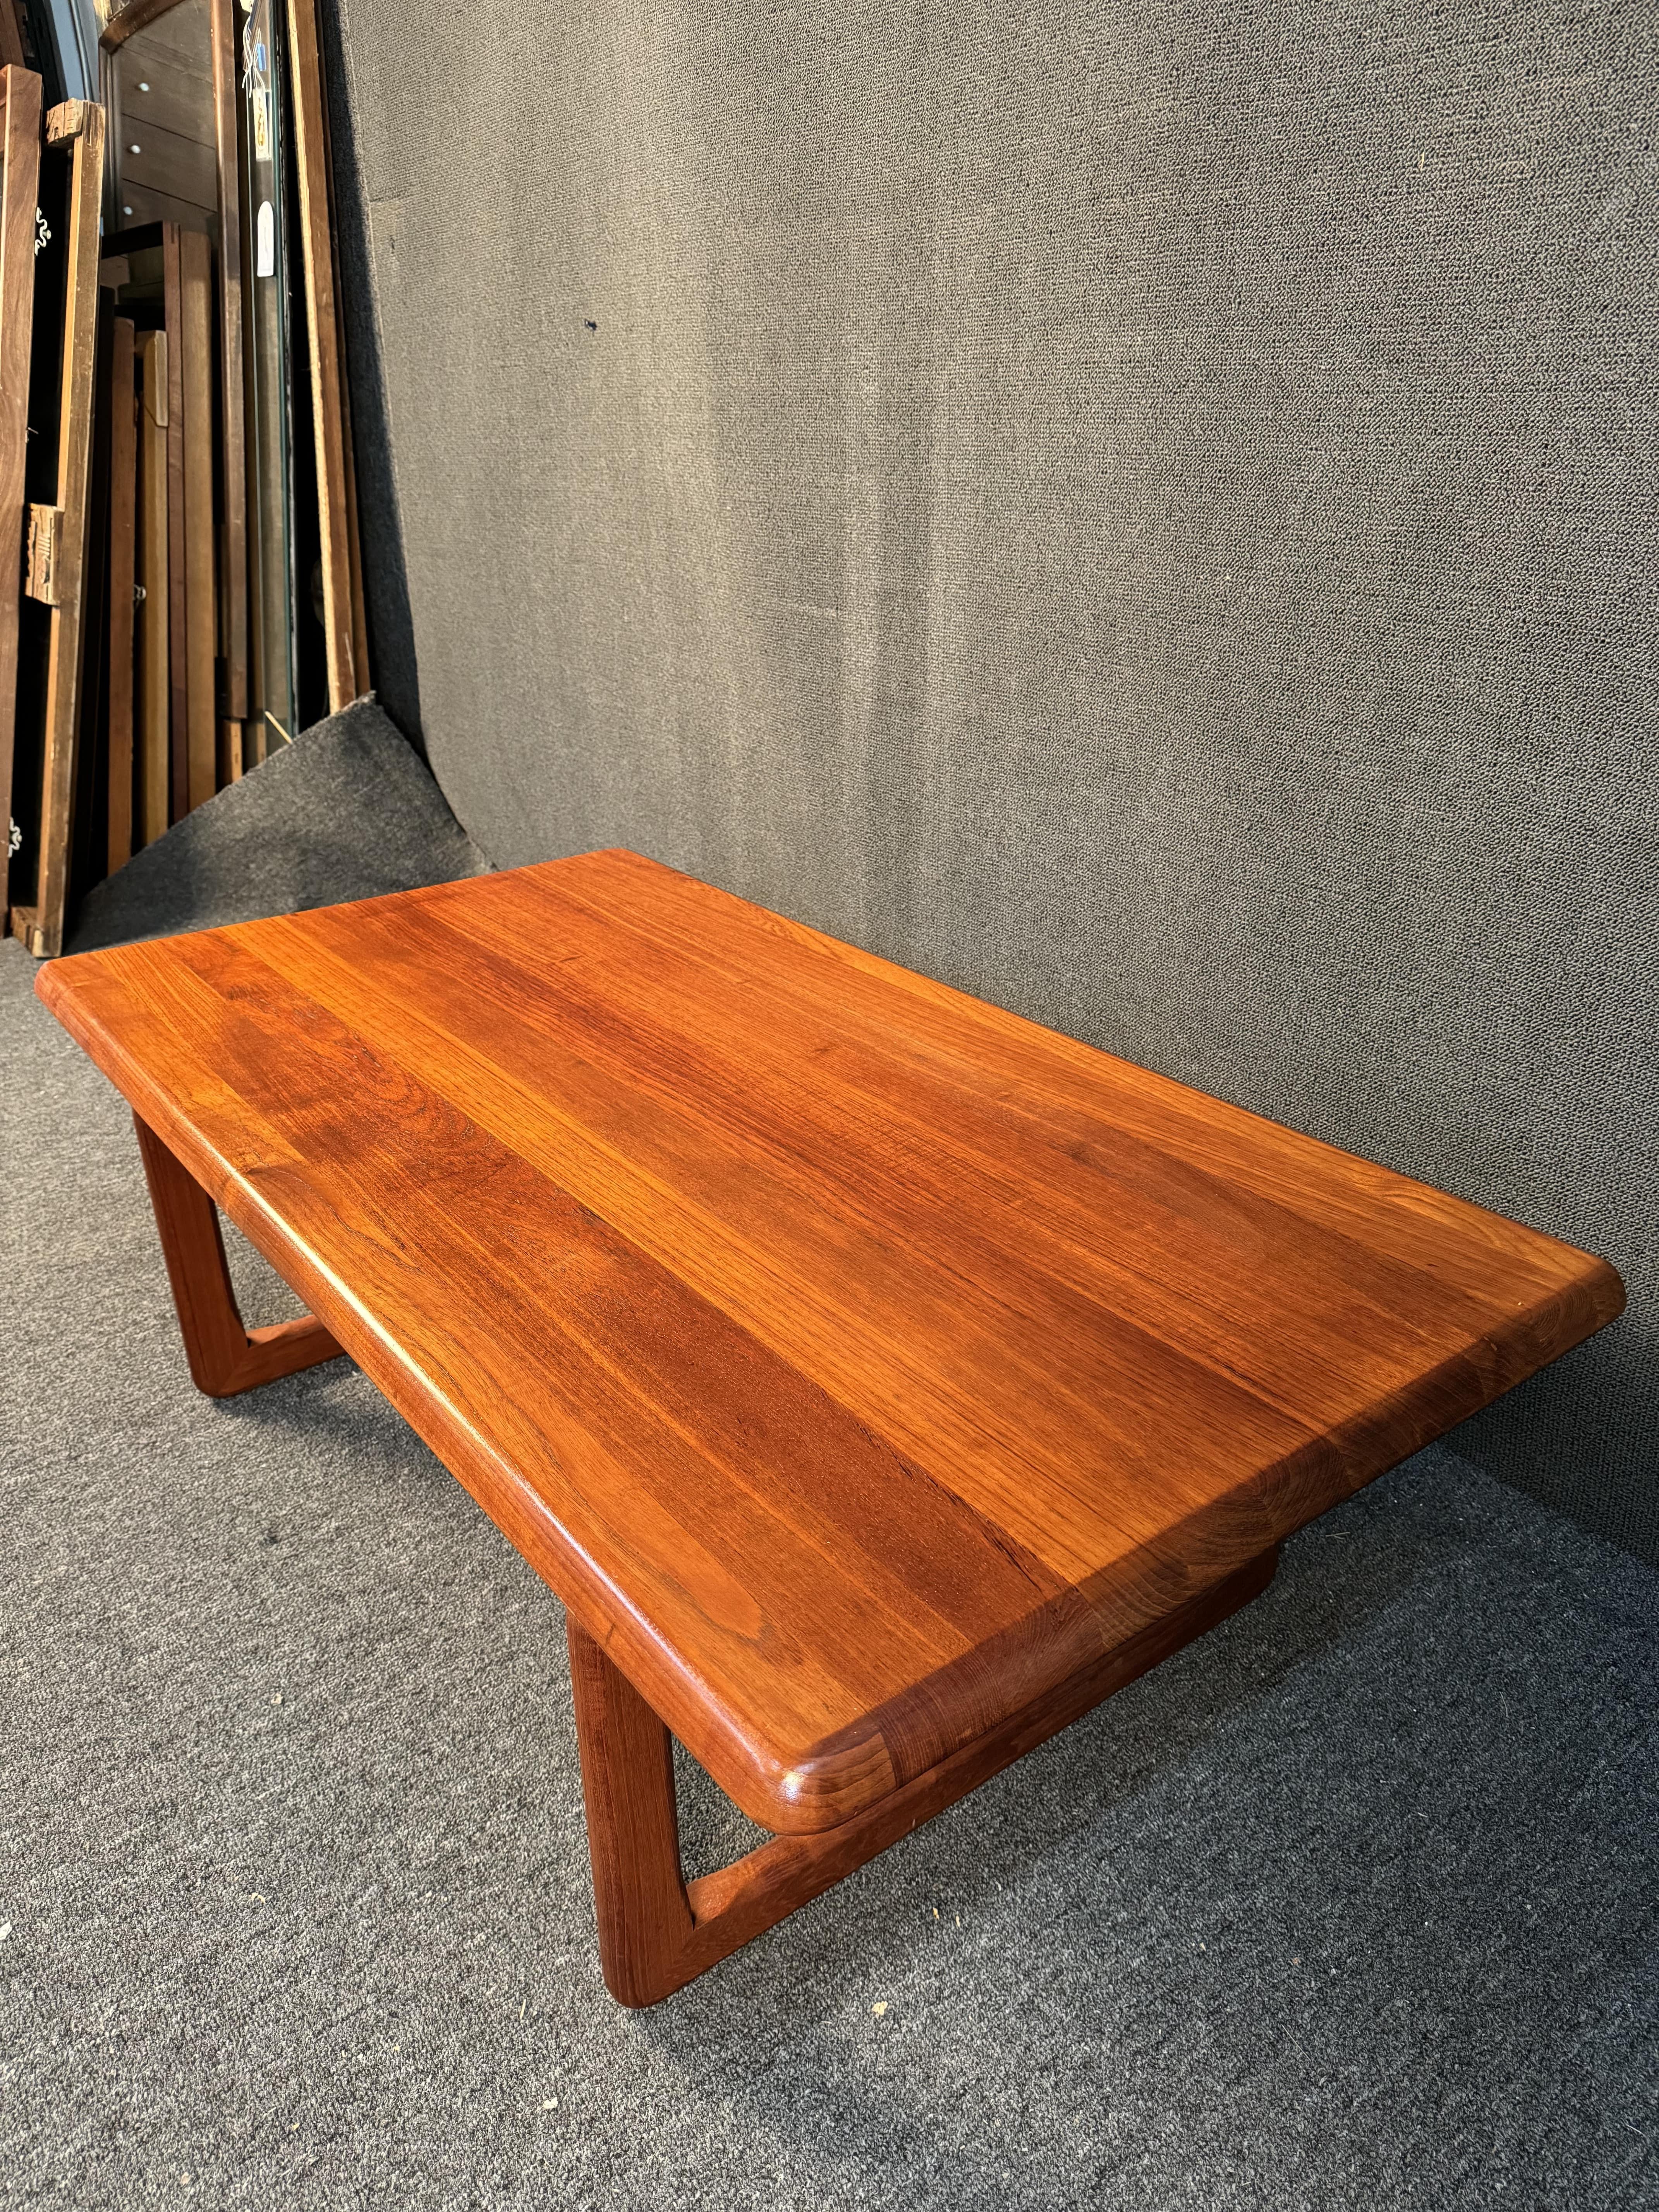 20th Century Vintage Coffee Table by Tarm Stole for Møbelfabrik For Sale